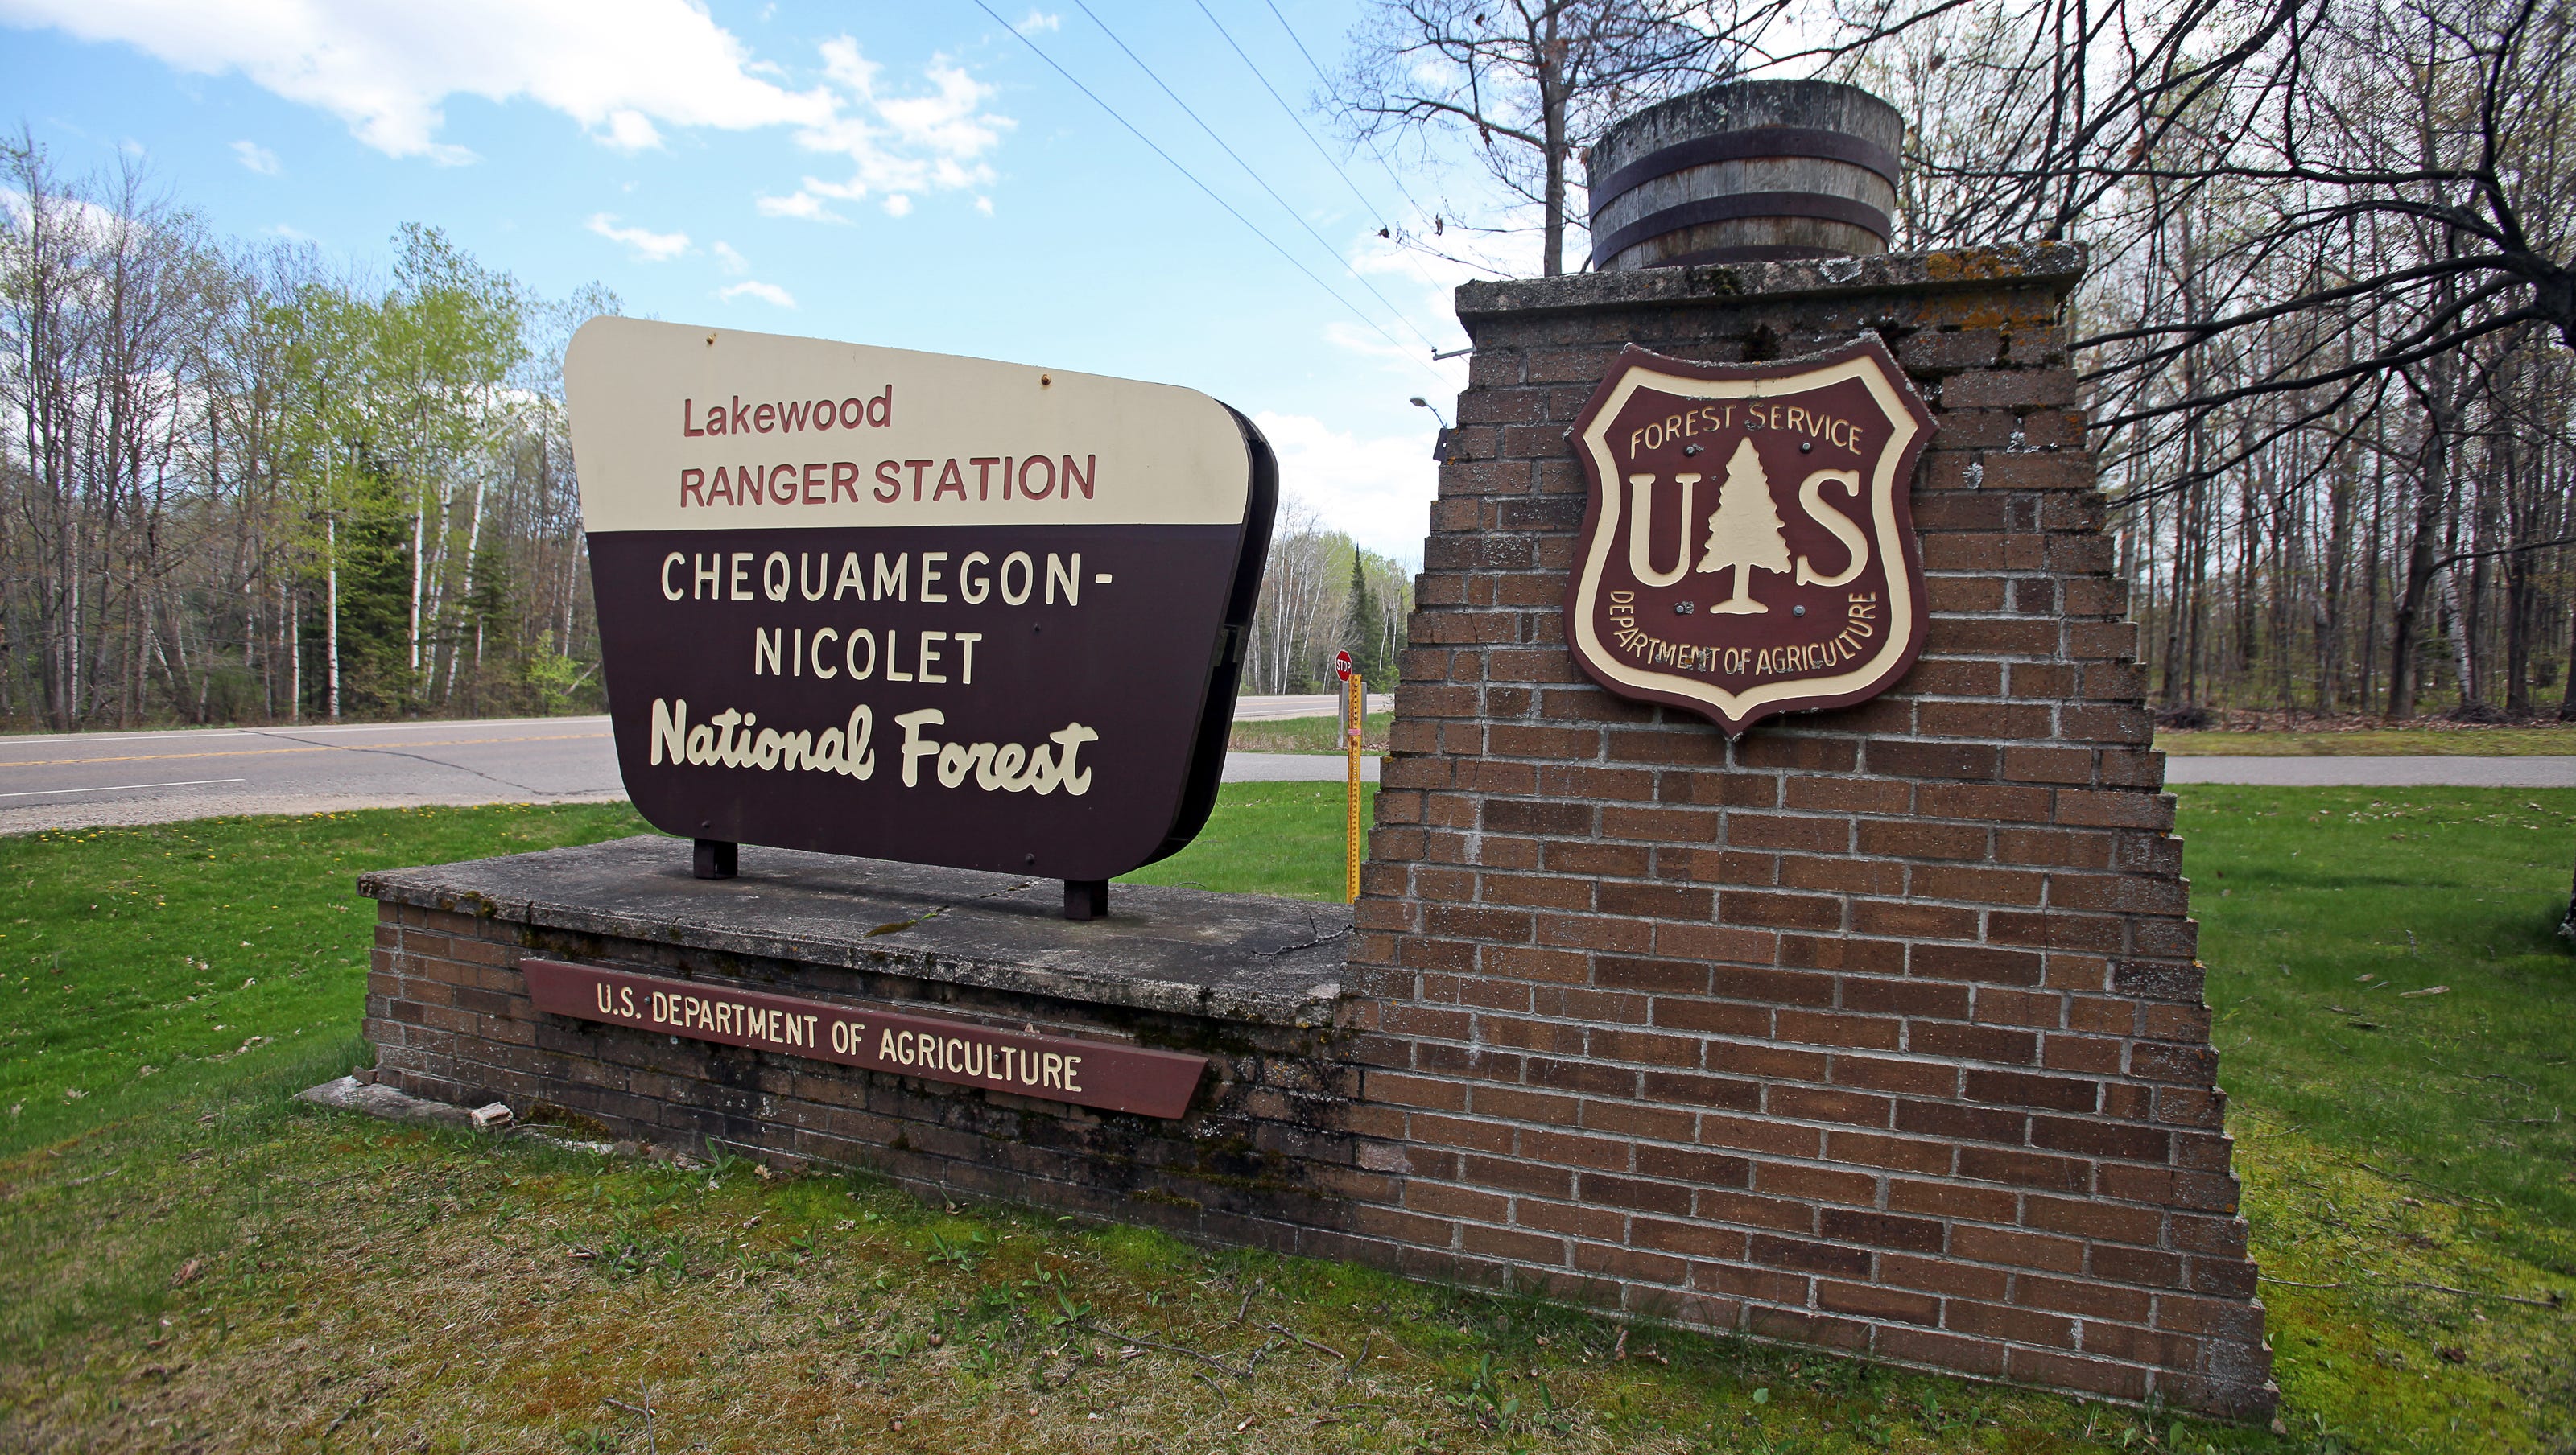 The Chequamegon-Nicolet National Forest covers more than 1.5 million acres in northern Wisconsin.